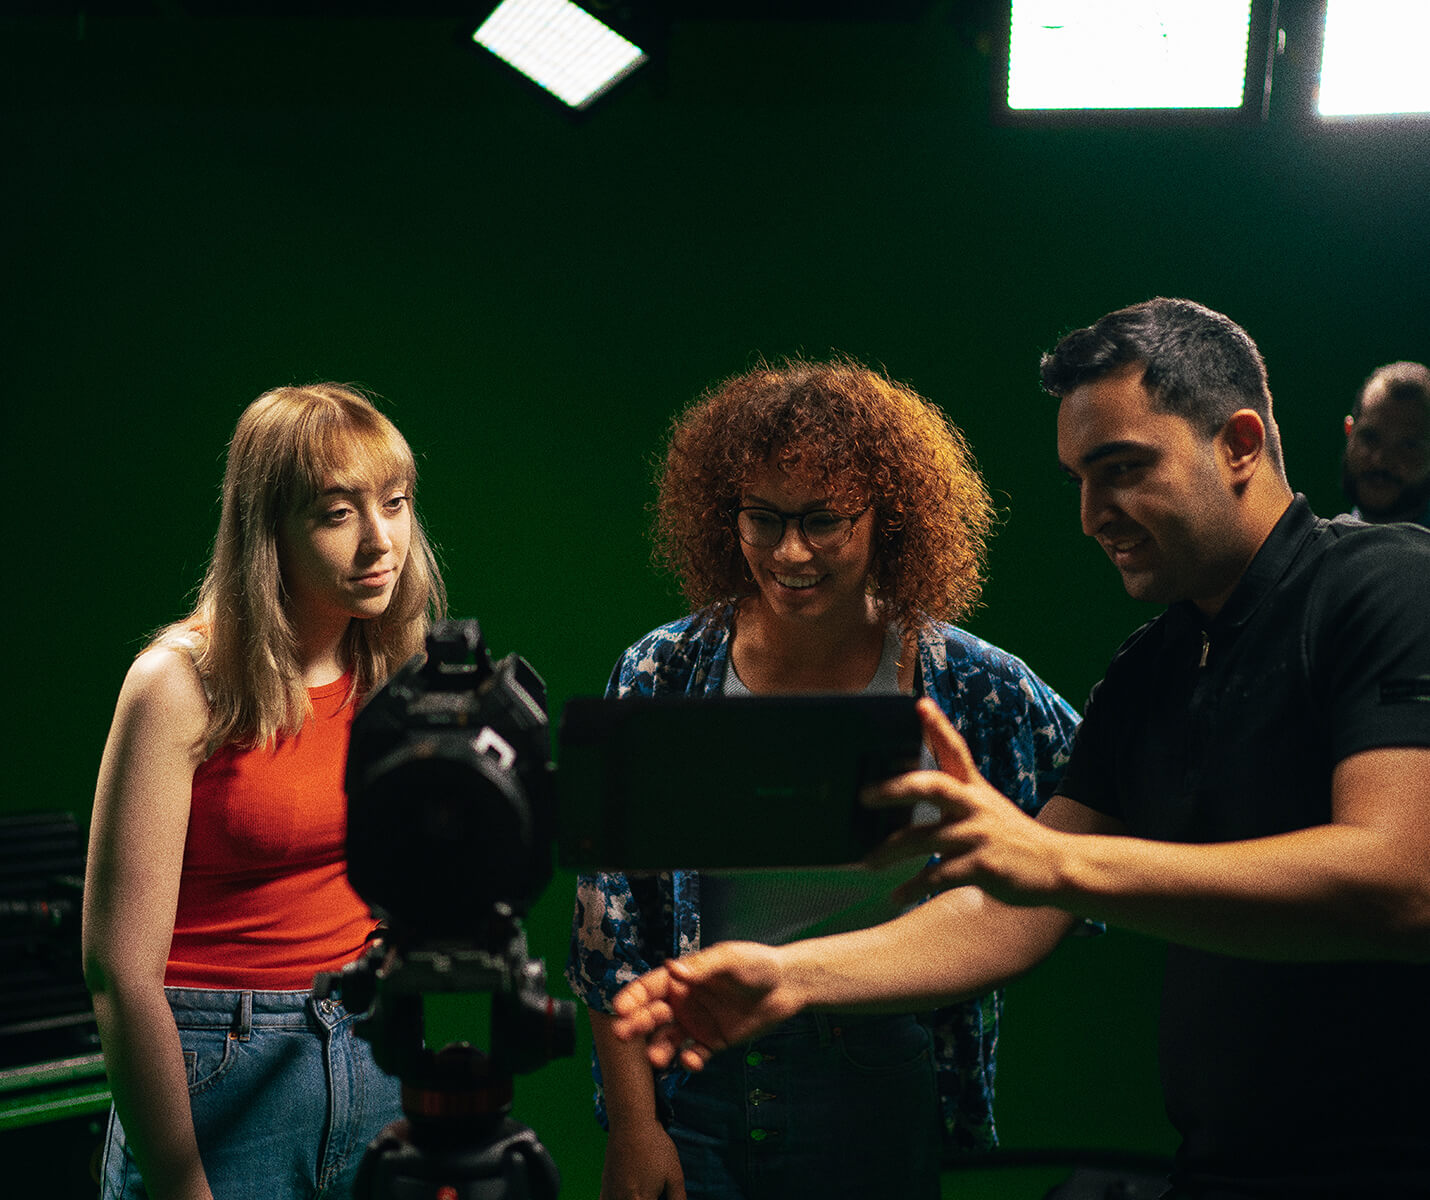 Three students view a camera in a green screen studio